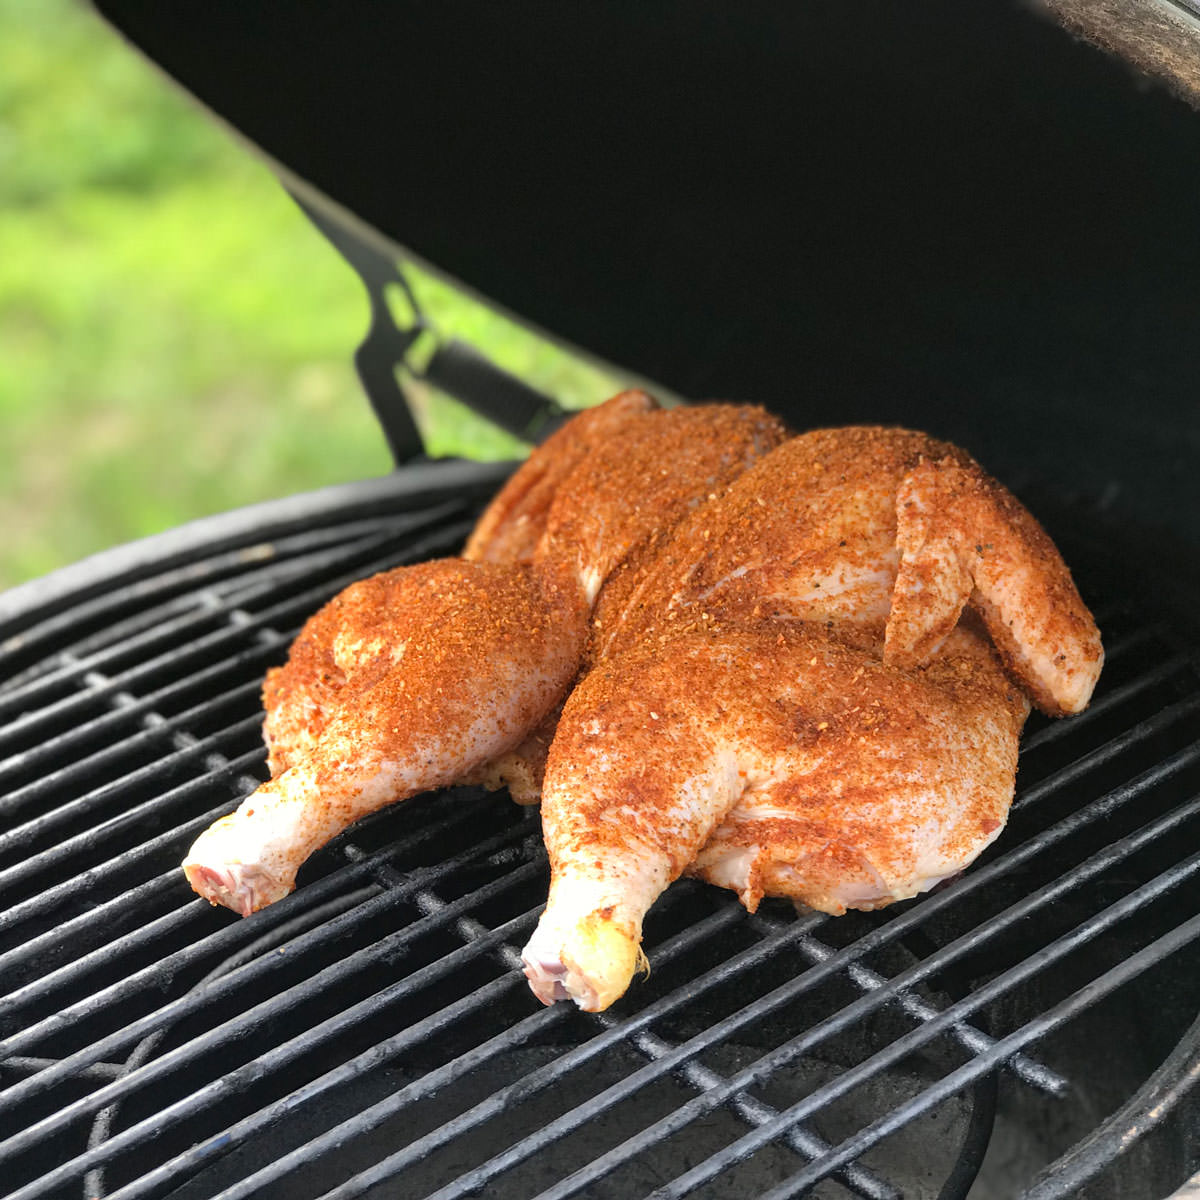 Place chicken on grill skin side up